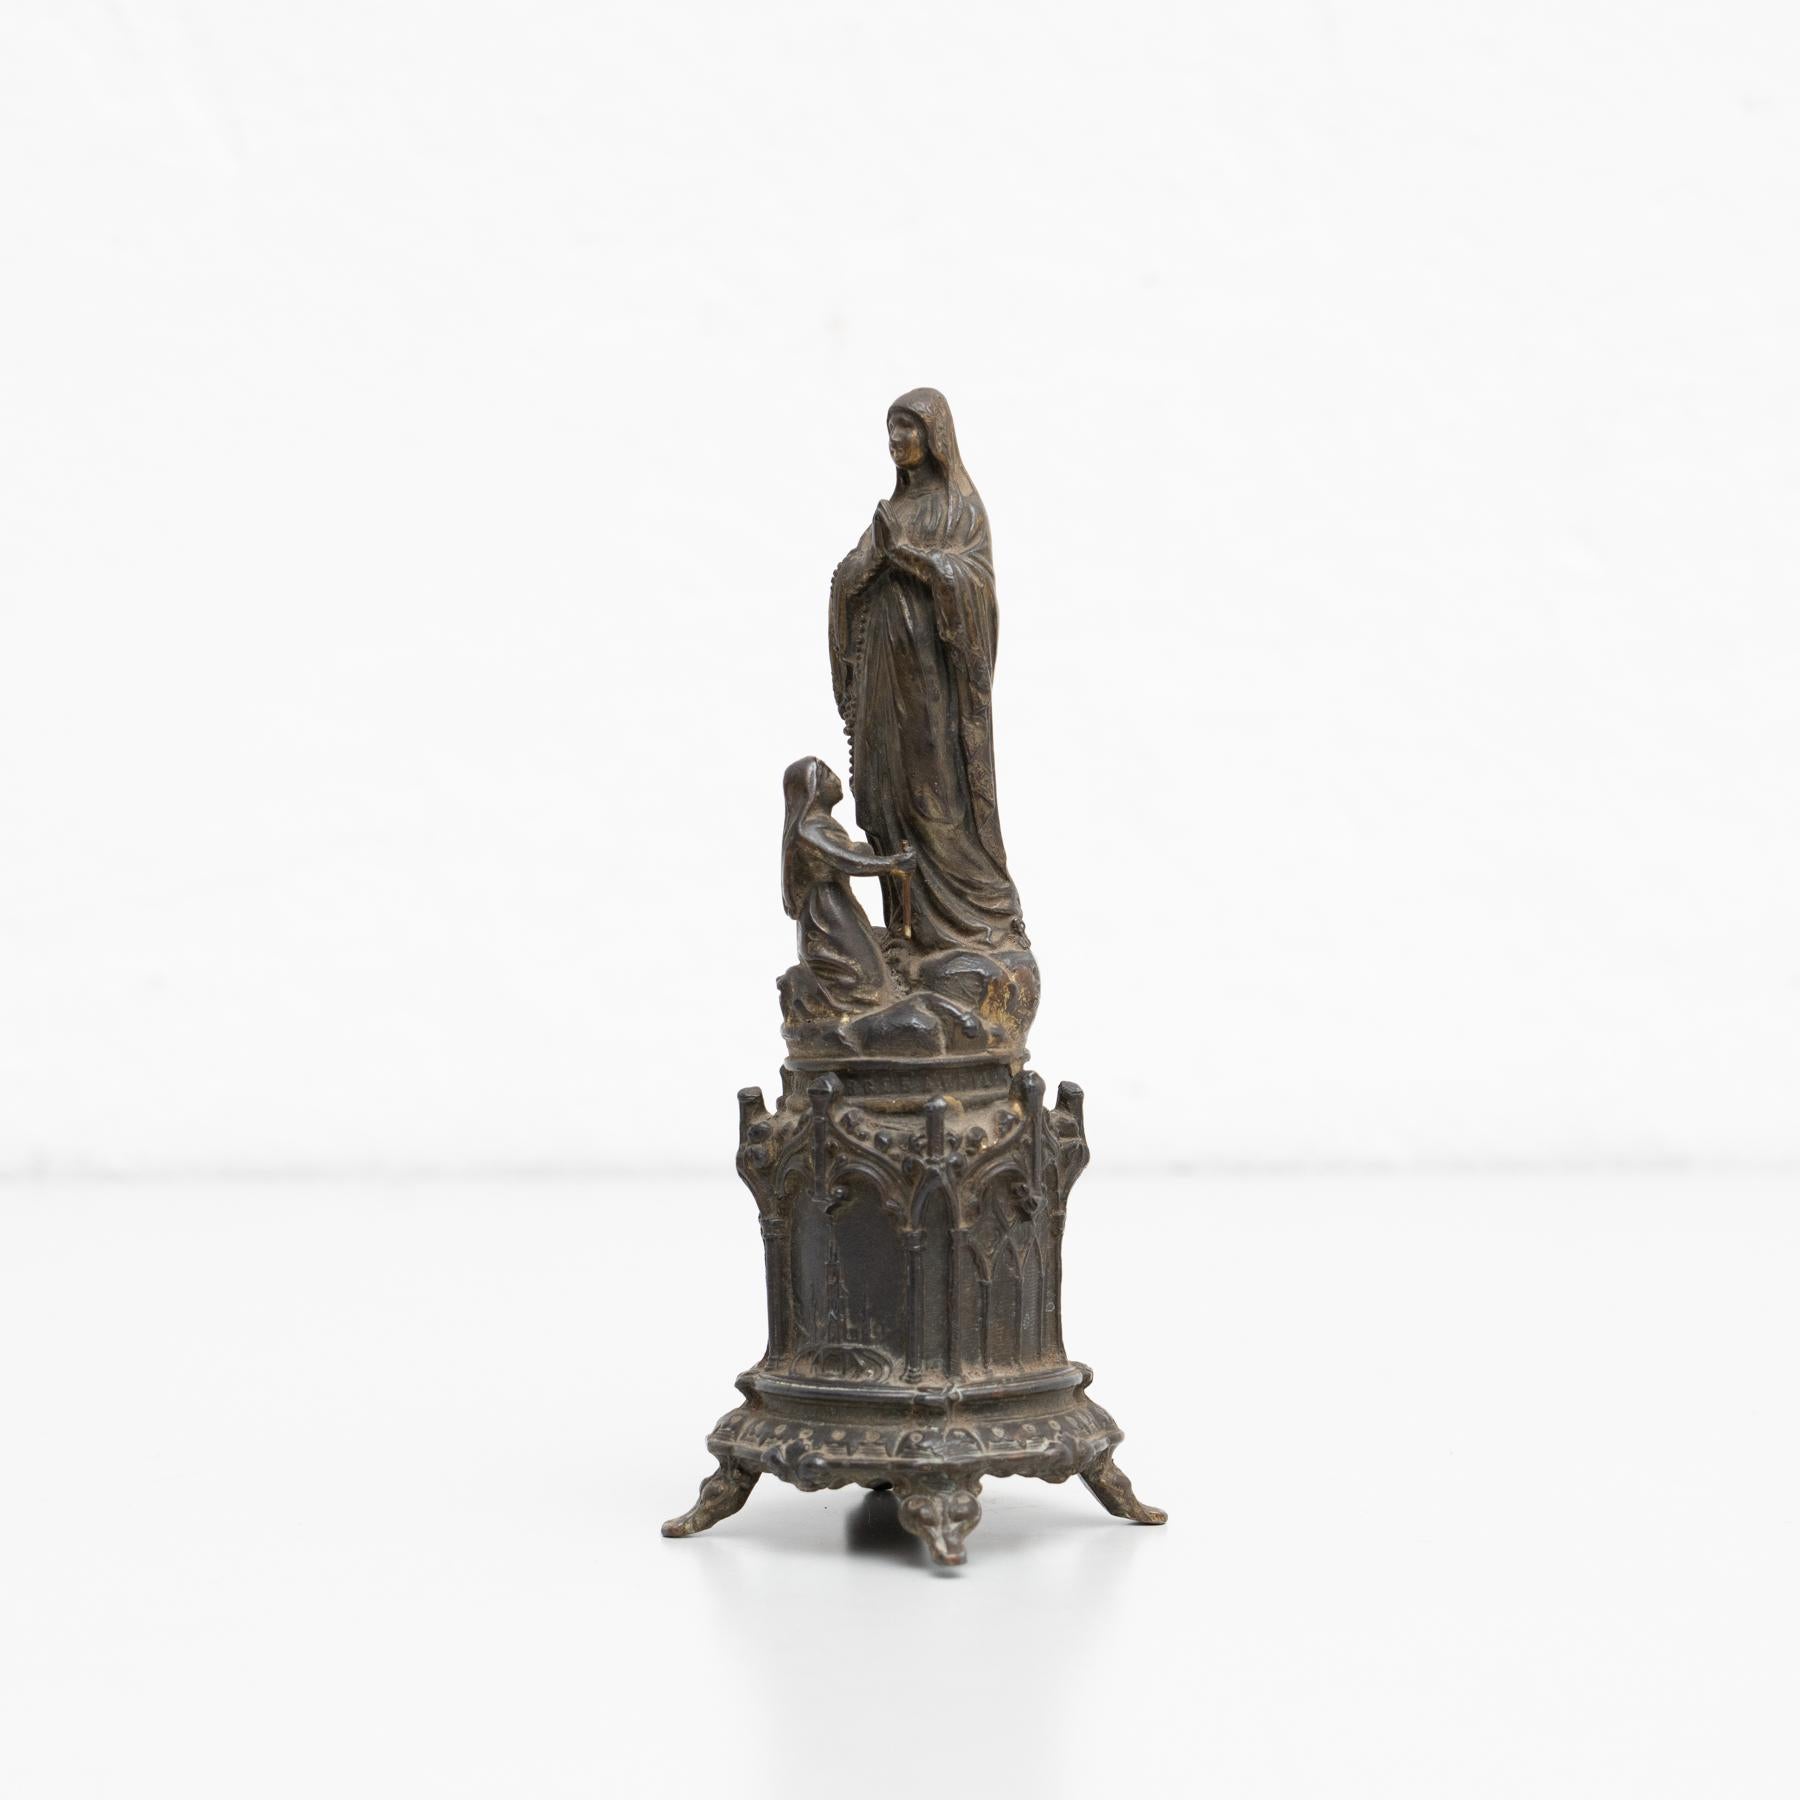 'Miracle du cierge' Lourde metallic virgin statue.

Made France, circa 1950.

In original condition, with minor wear consistent with age and use, preserving a beautiful patina.

Materials:
Metal.
 